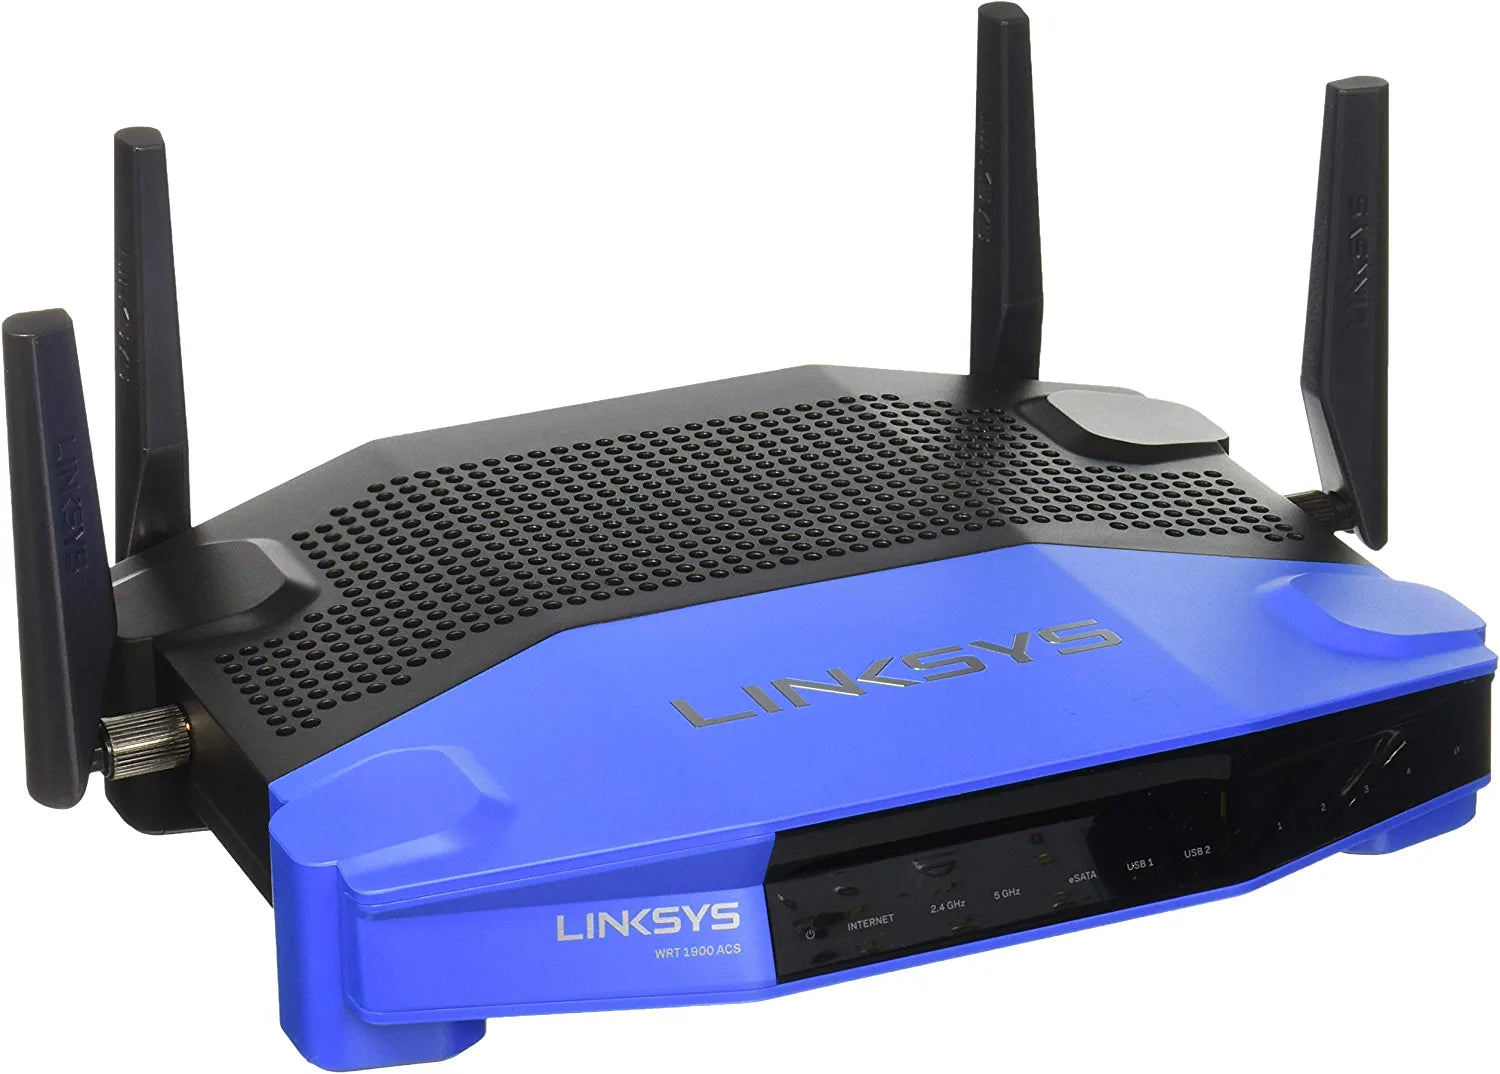 Linksys WRT1900AC AP Dual Band Wireless Router